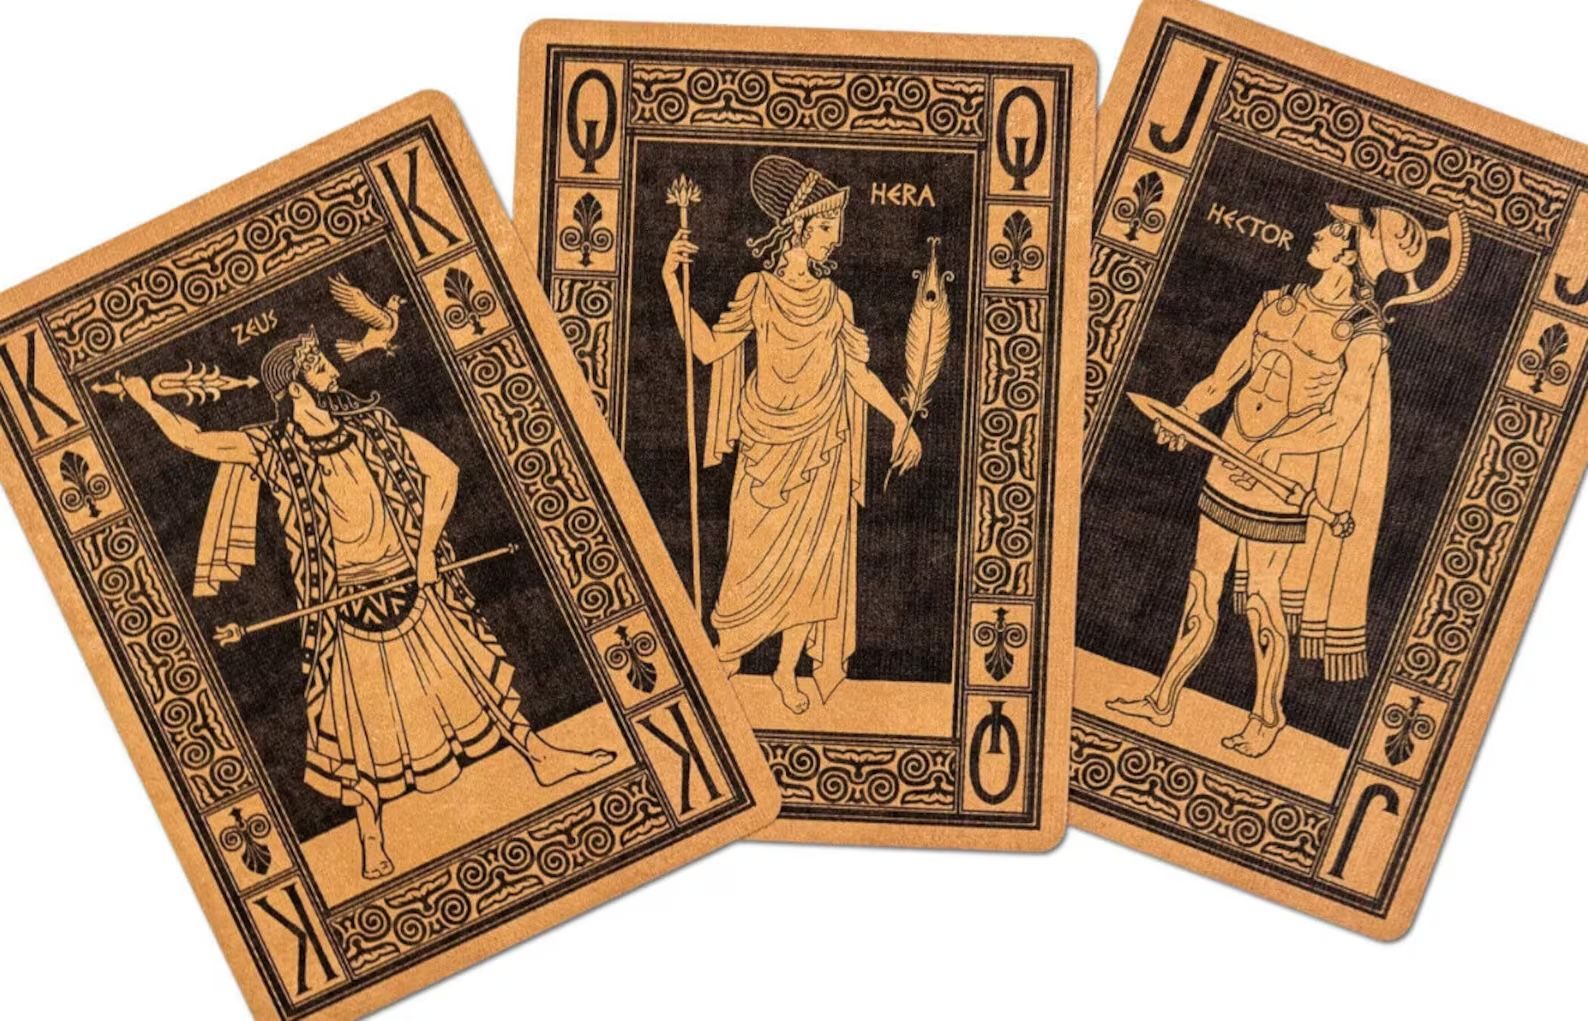 black and yellow gold playing cards featuring characters from the Iliad